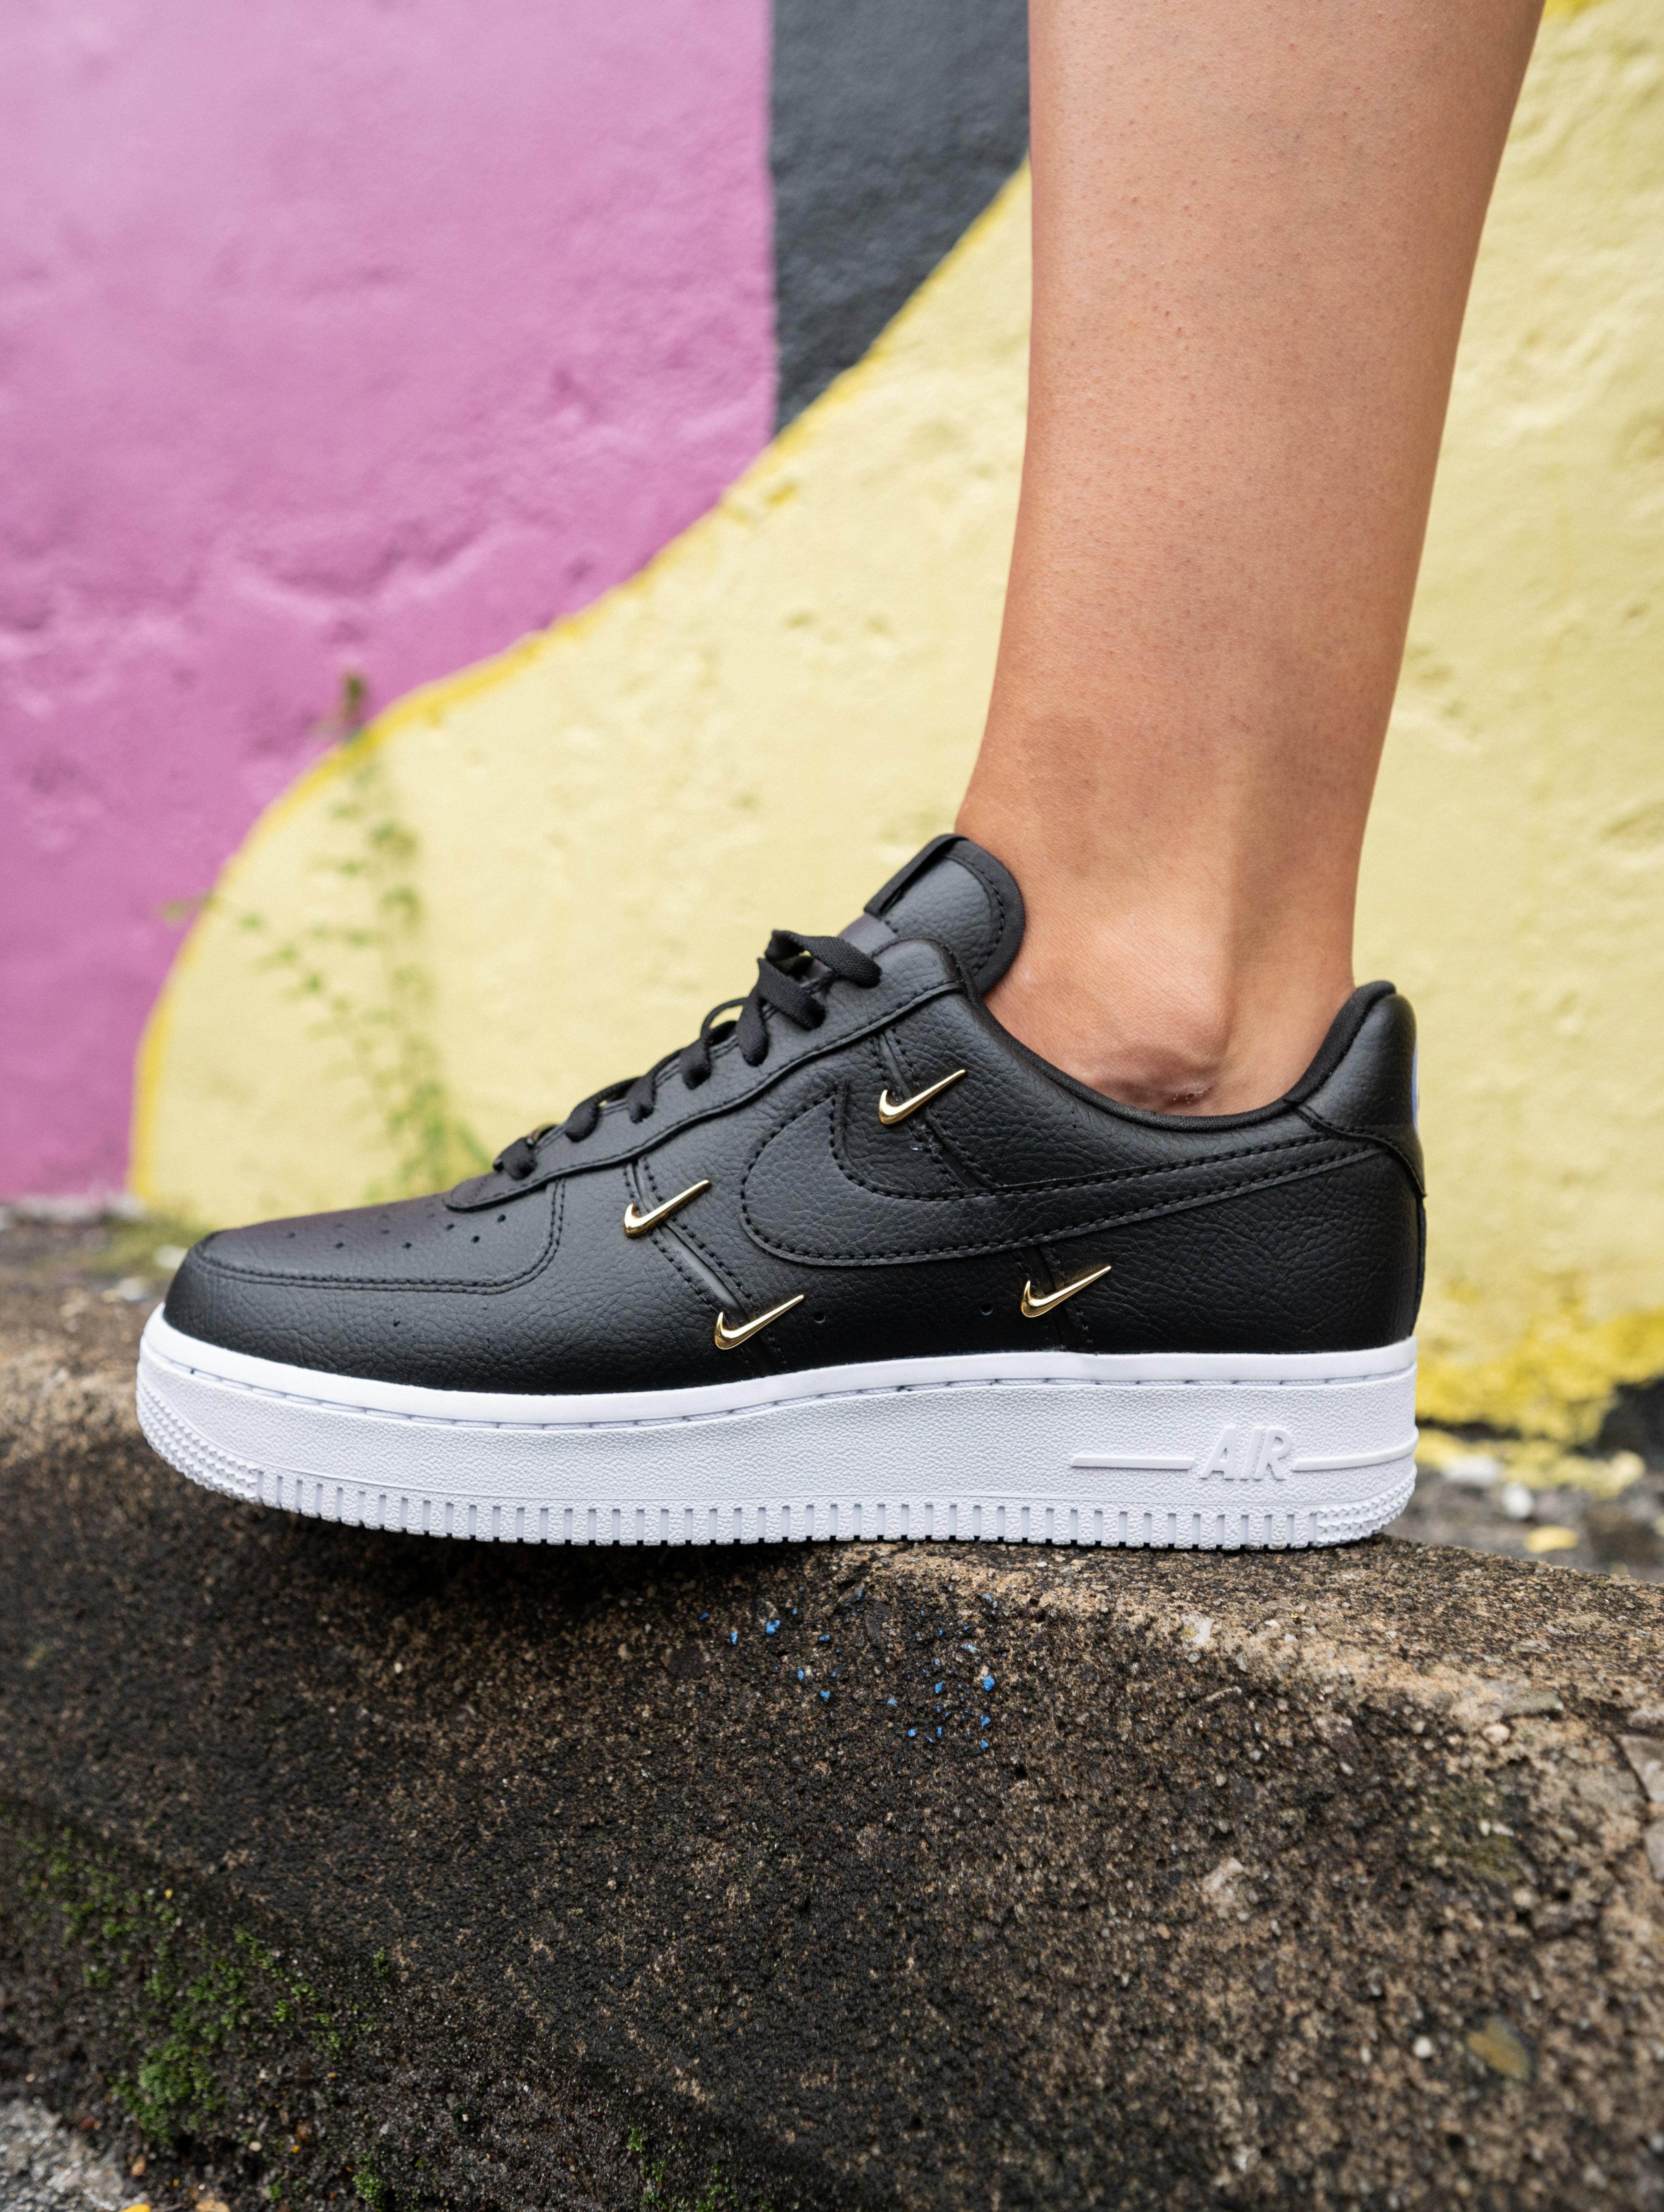 Sneakers Release – Nike Air Force 1 ’07 “St